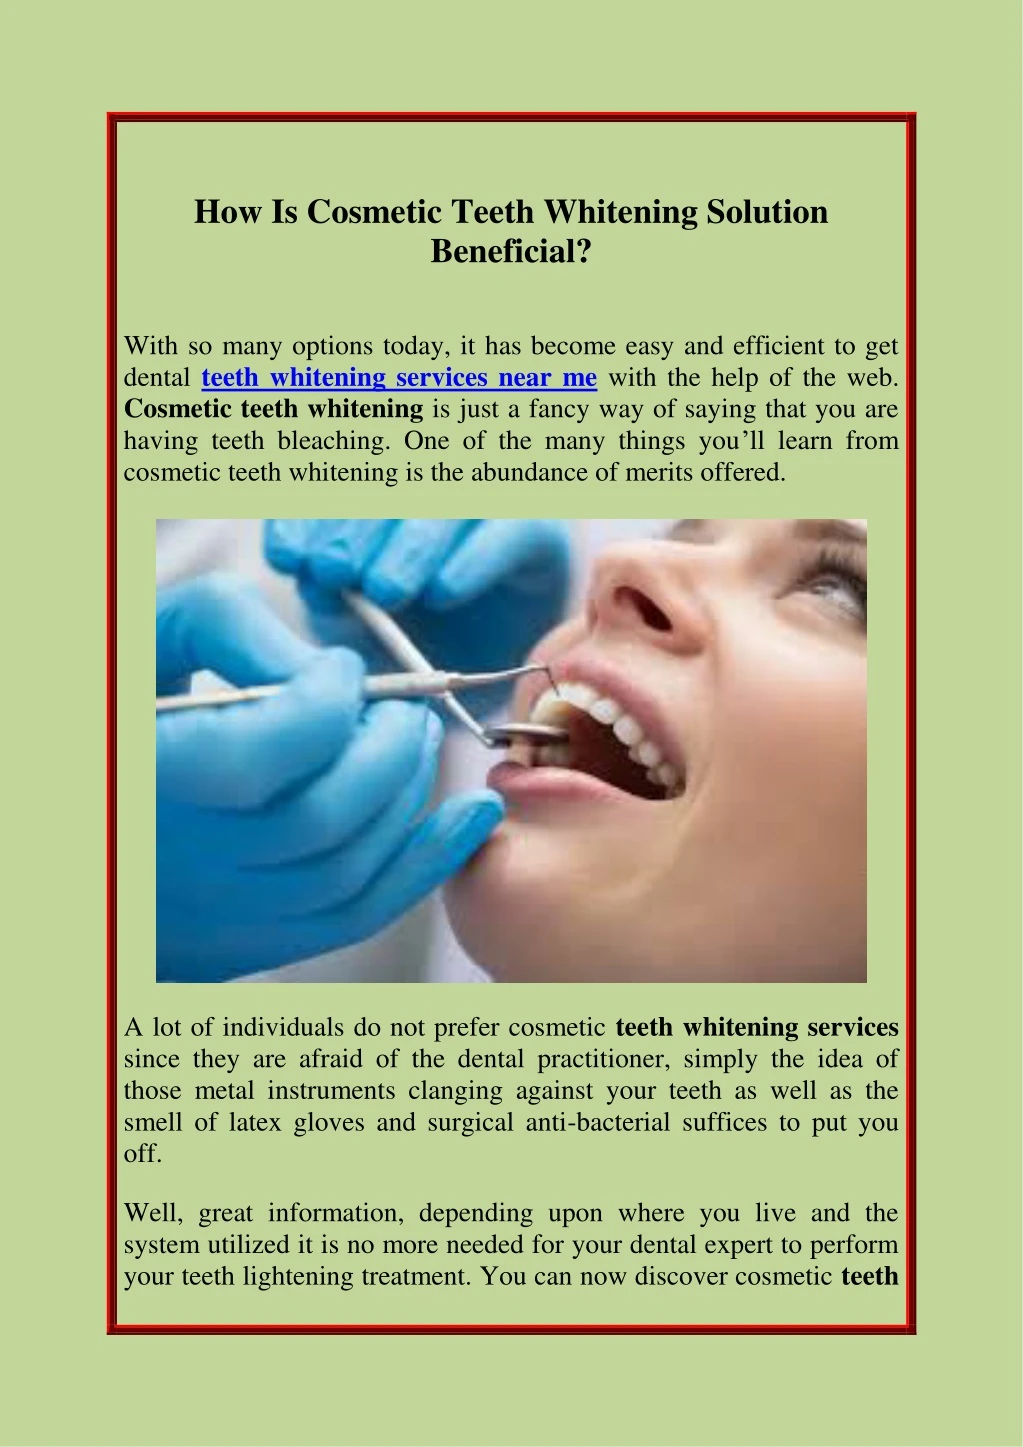 how is cosmetic teeth whitening solution